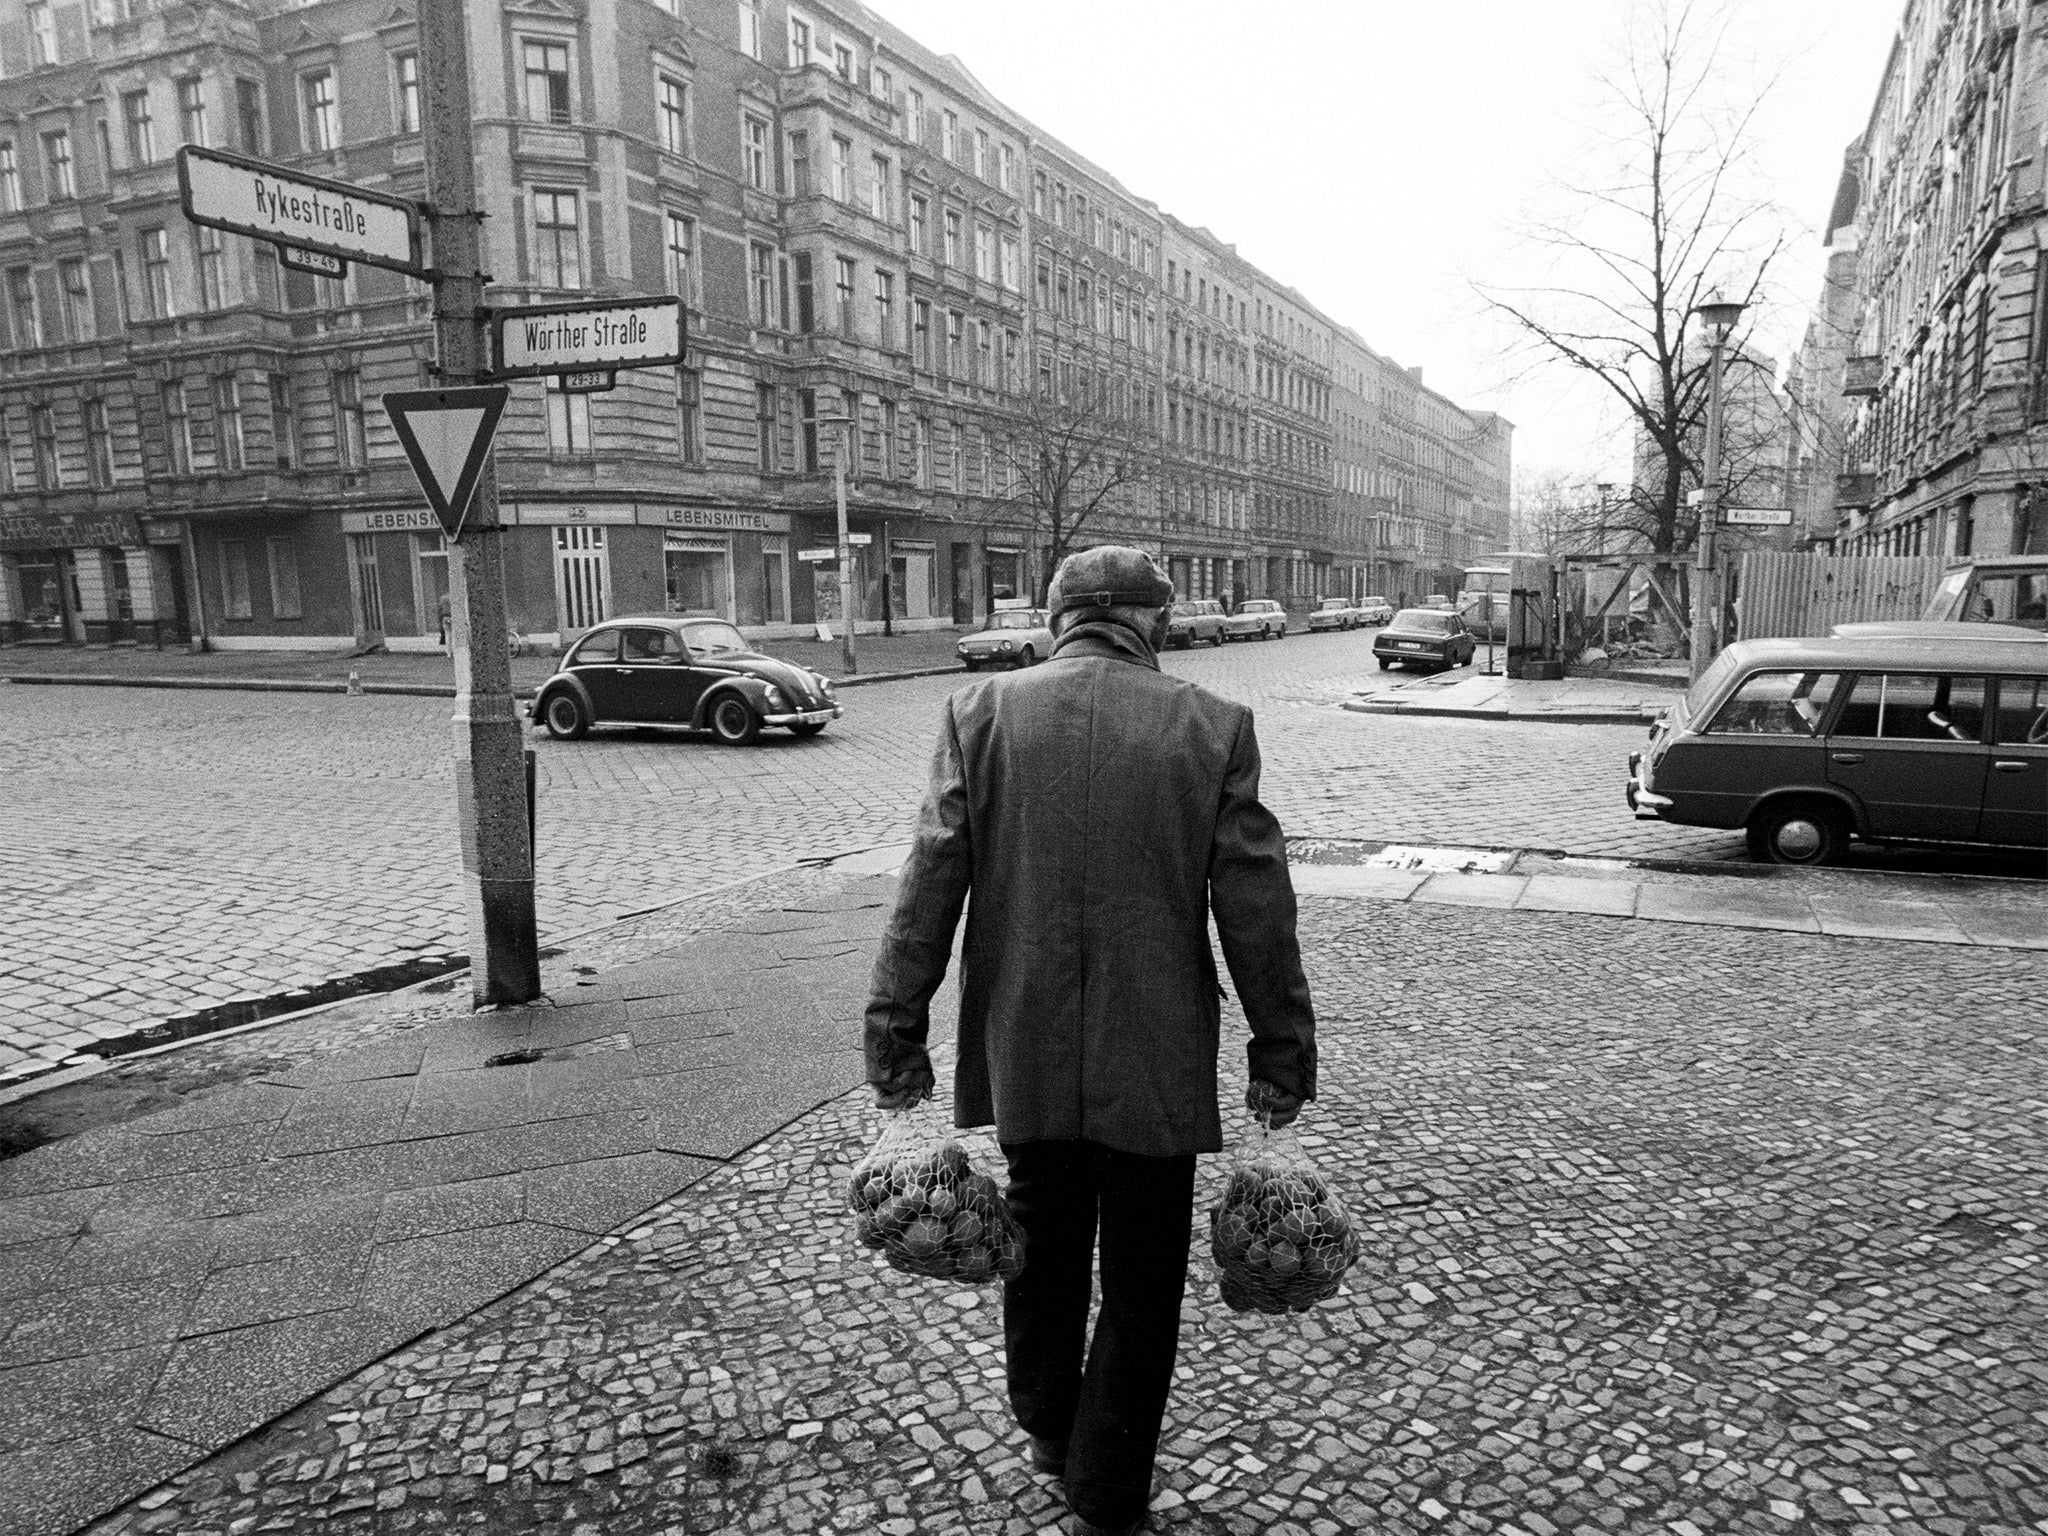 East Berlin, just 2 days before the Berlin Wall came down